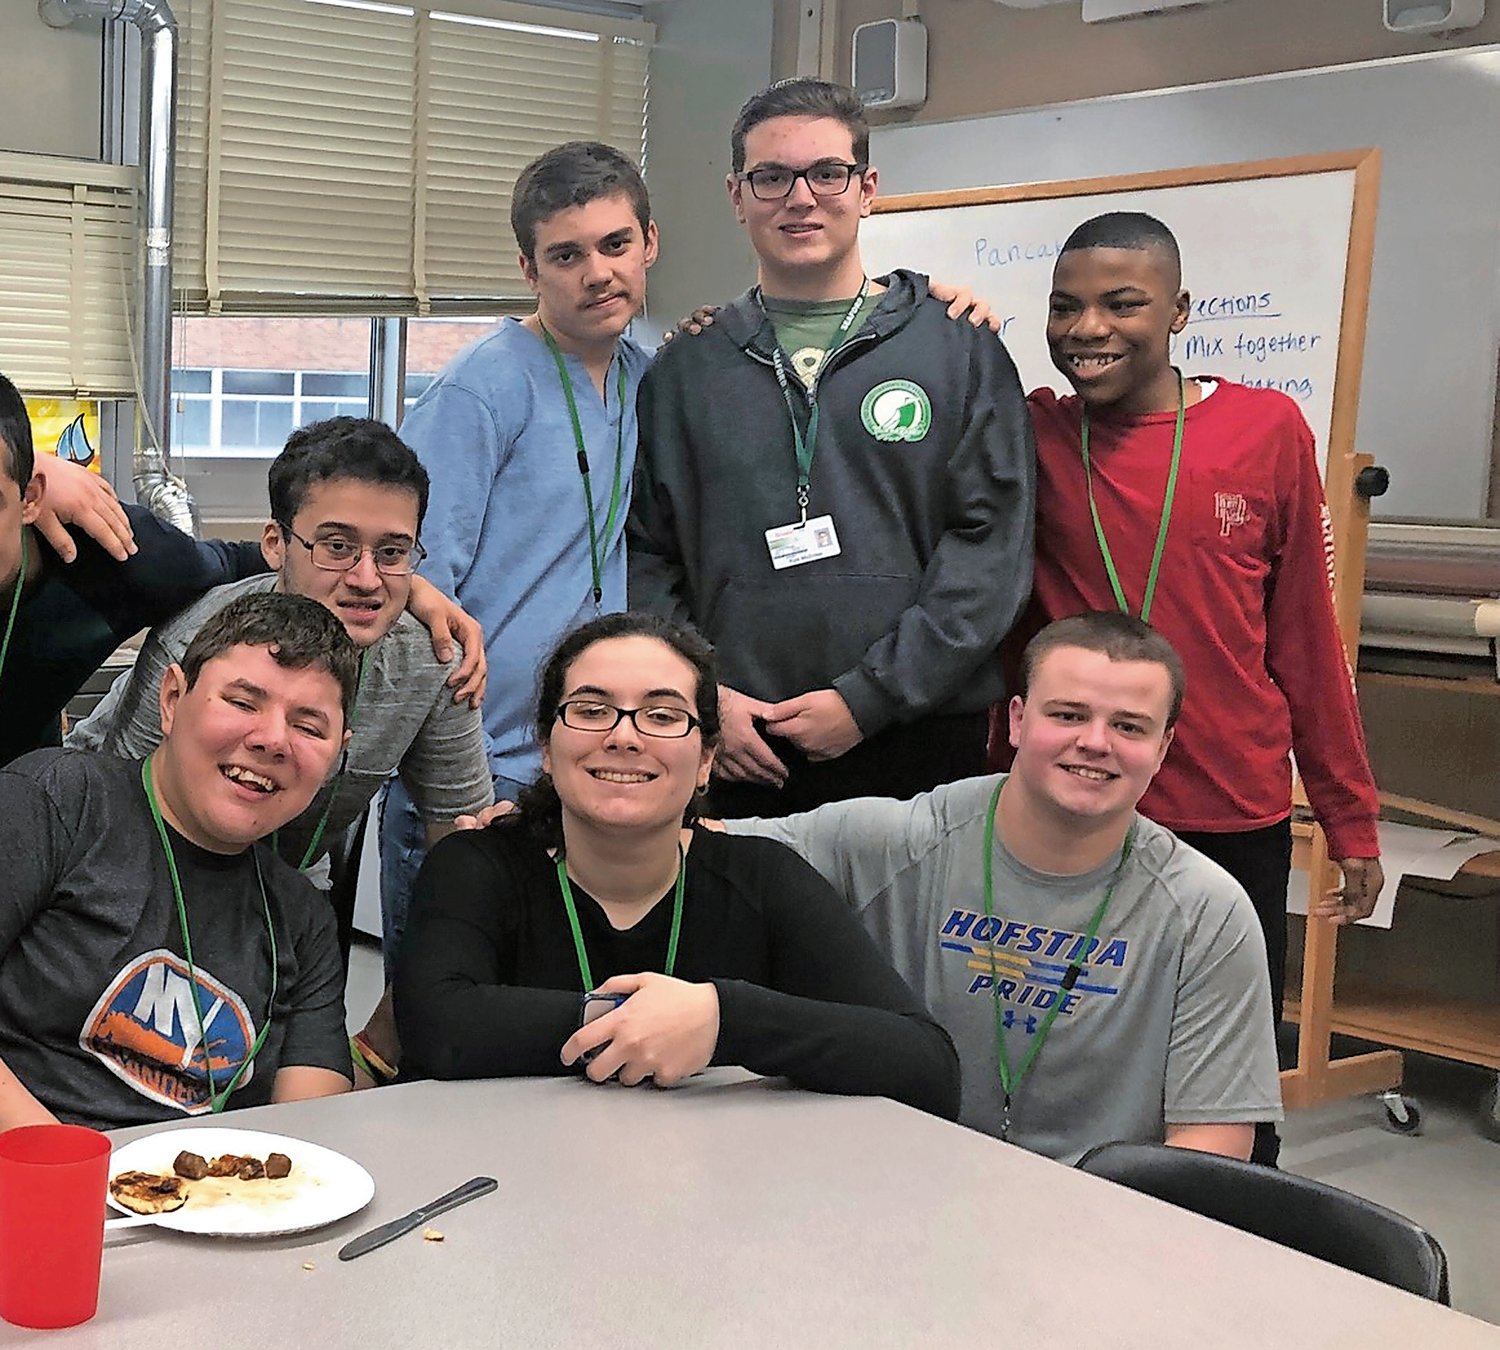 Danielle Palermo, 21, graduated from the Seaford School District’s CDP Program in 2019, and now has a job in the cafeteria at West Hempstead High School.